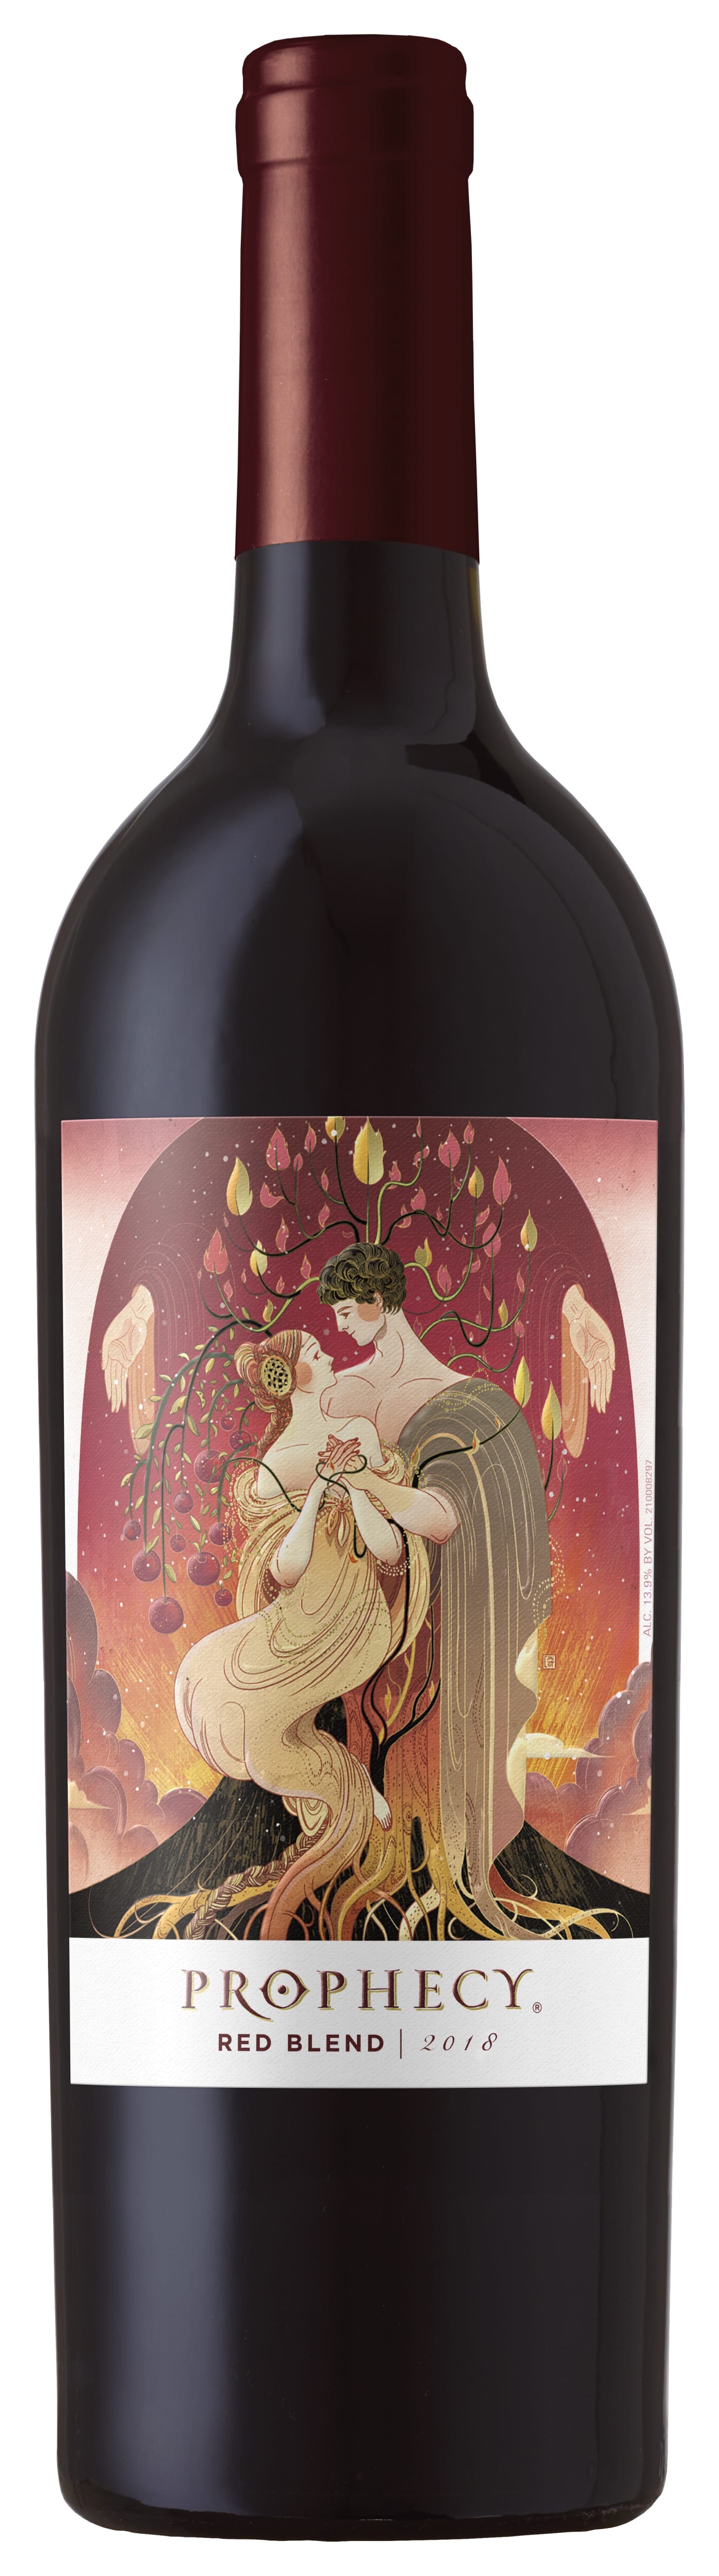 Prophecy Red Blend 2018